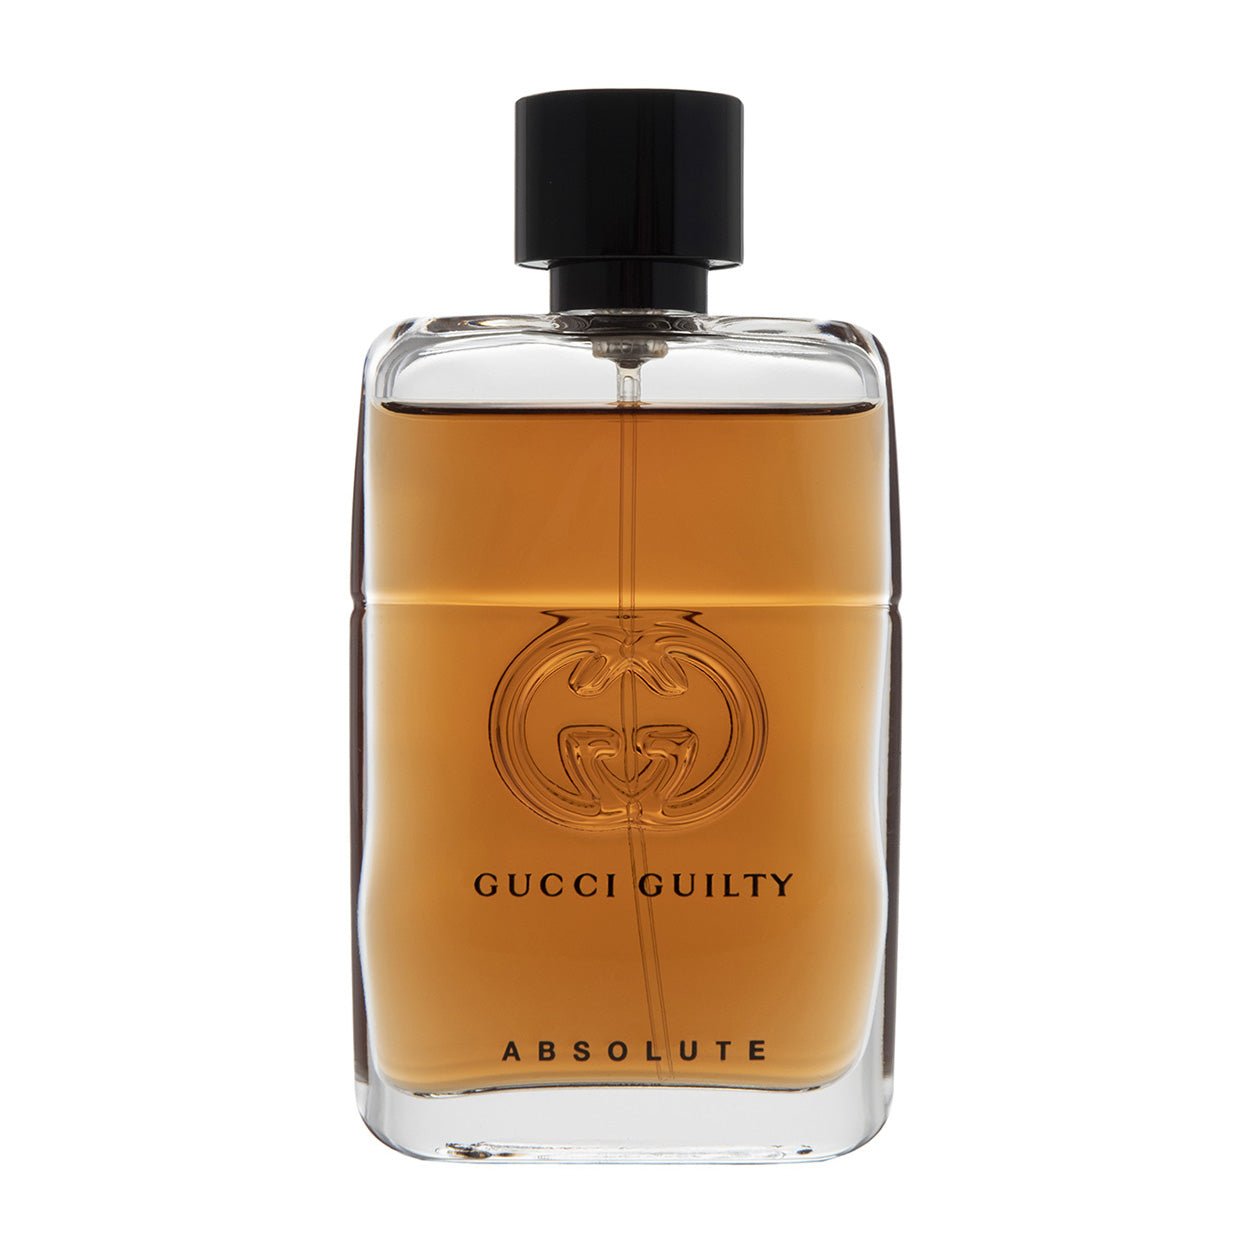 Gucci Guilty Absolute EDP For Men - 90ml - Bloom Pharmacy